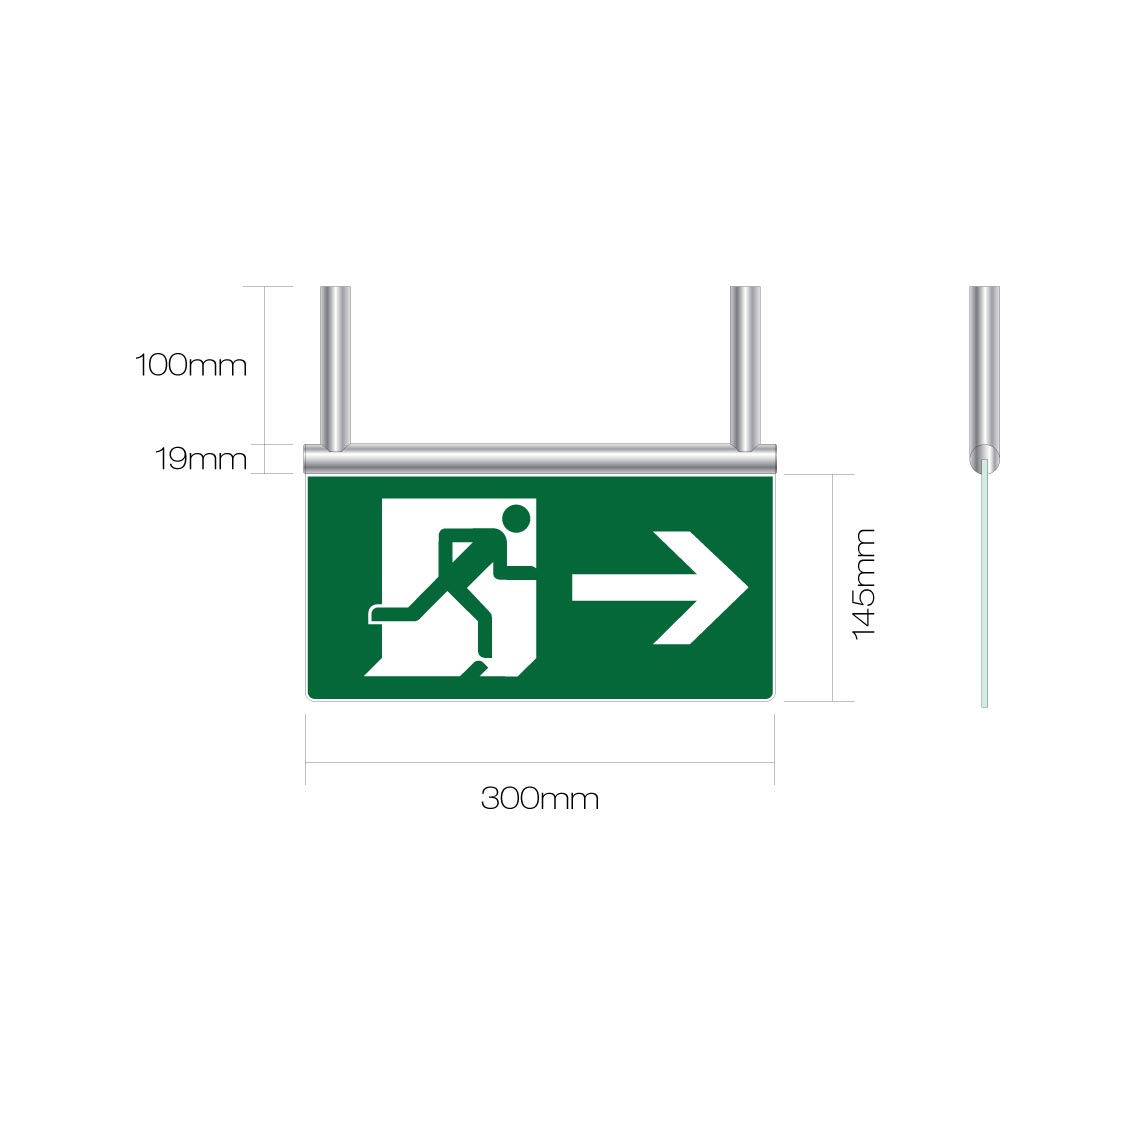 Fire Exit Sign - Signslot Ceiling Mounted 